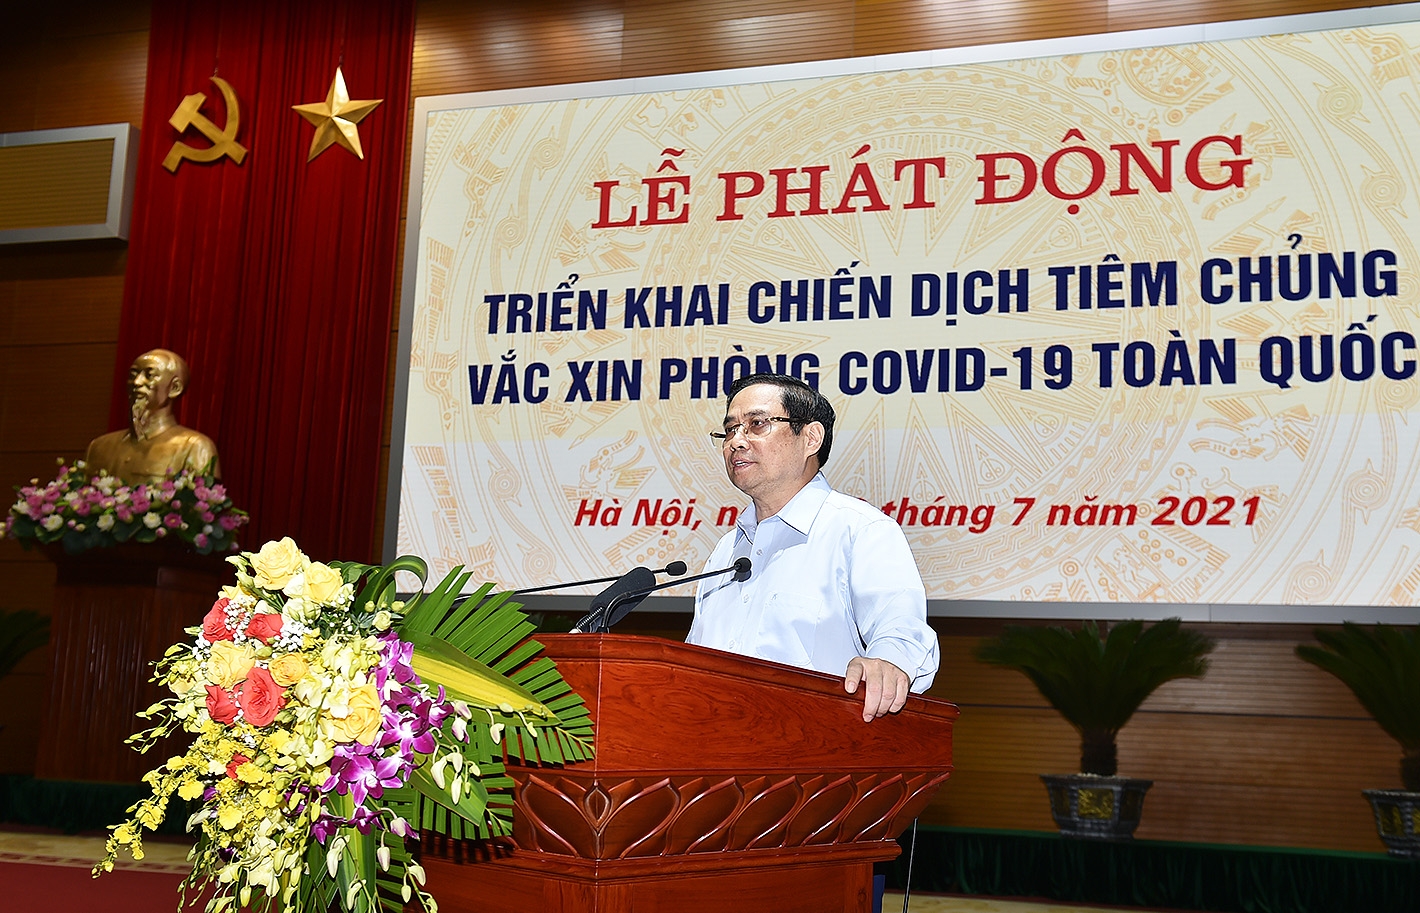 Vietnam officially launches nationwide COVID-19 vaccination campaign on July 10